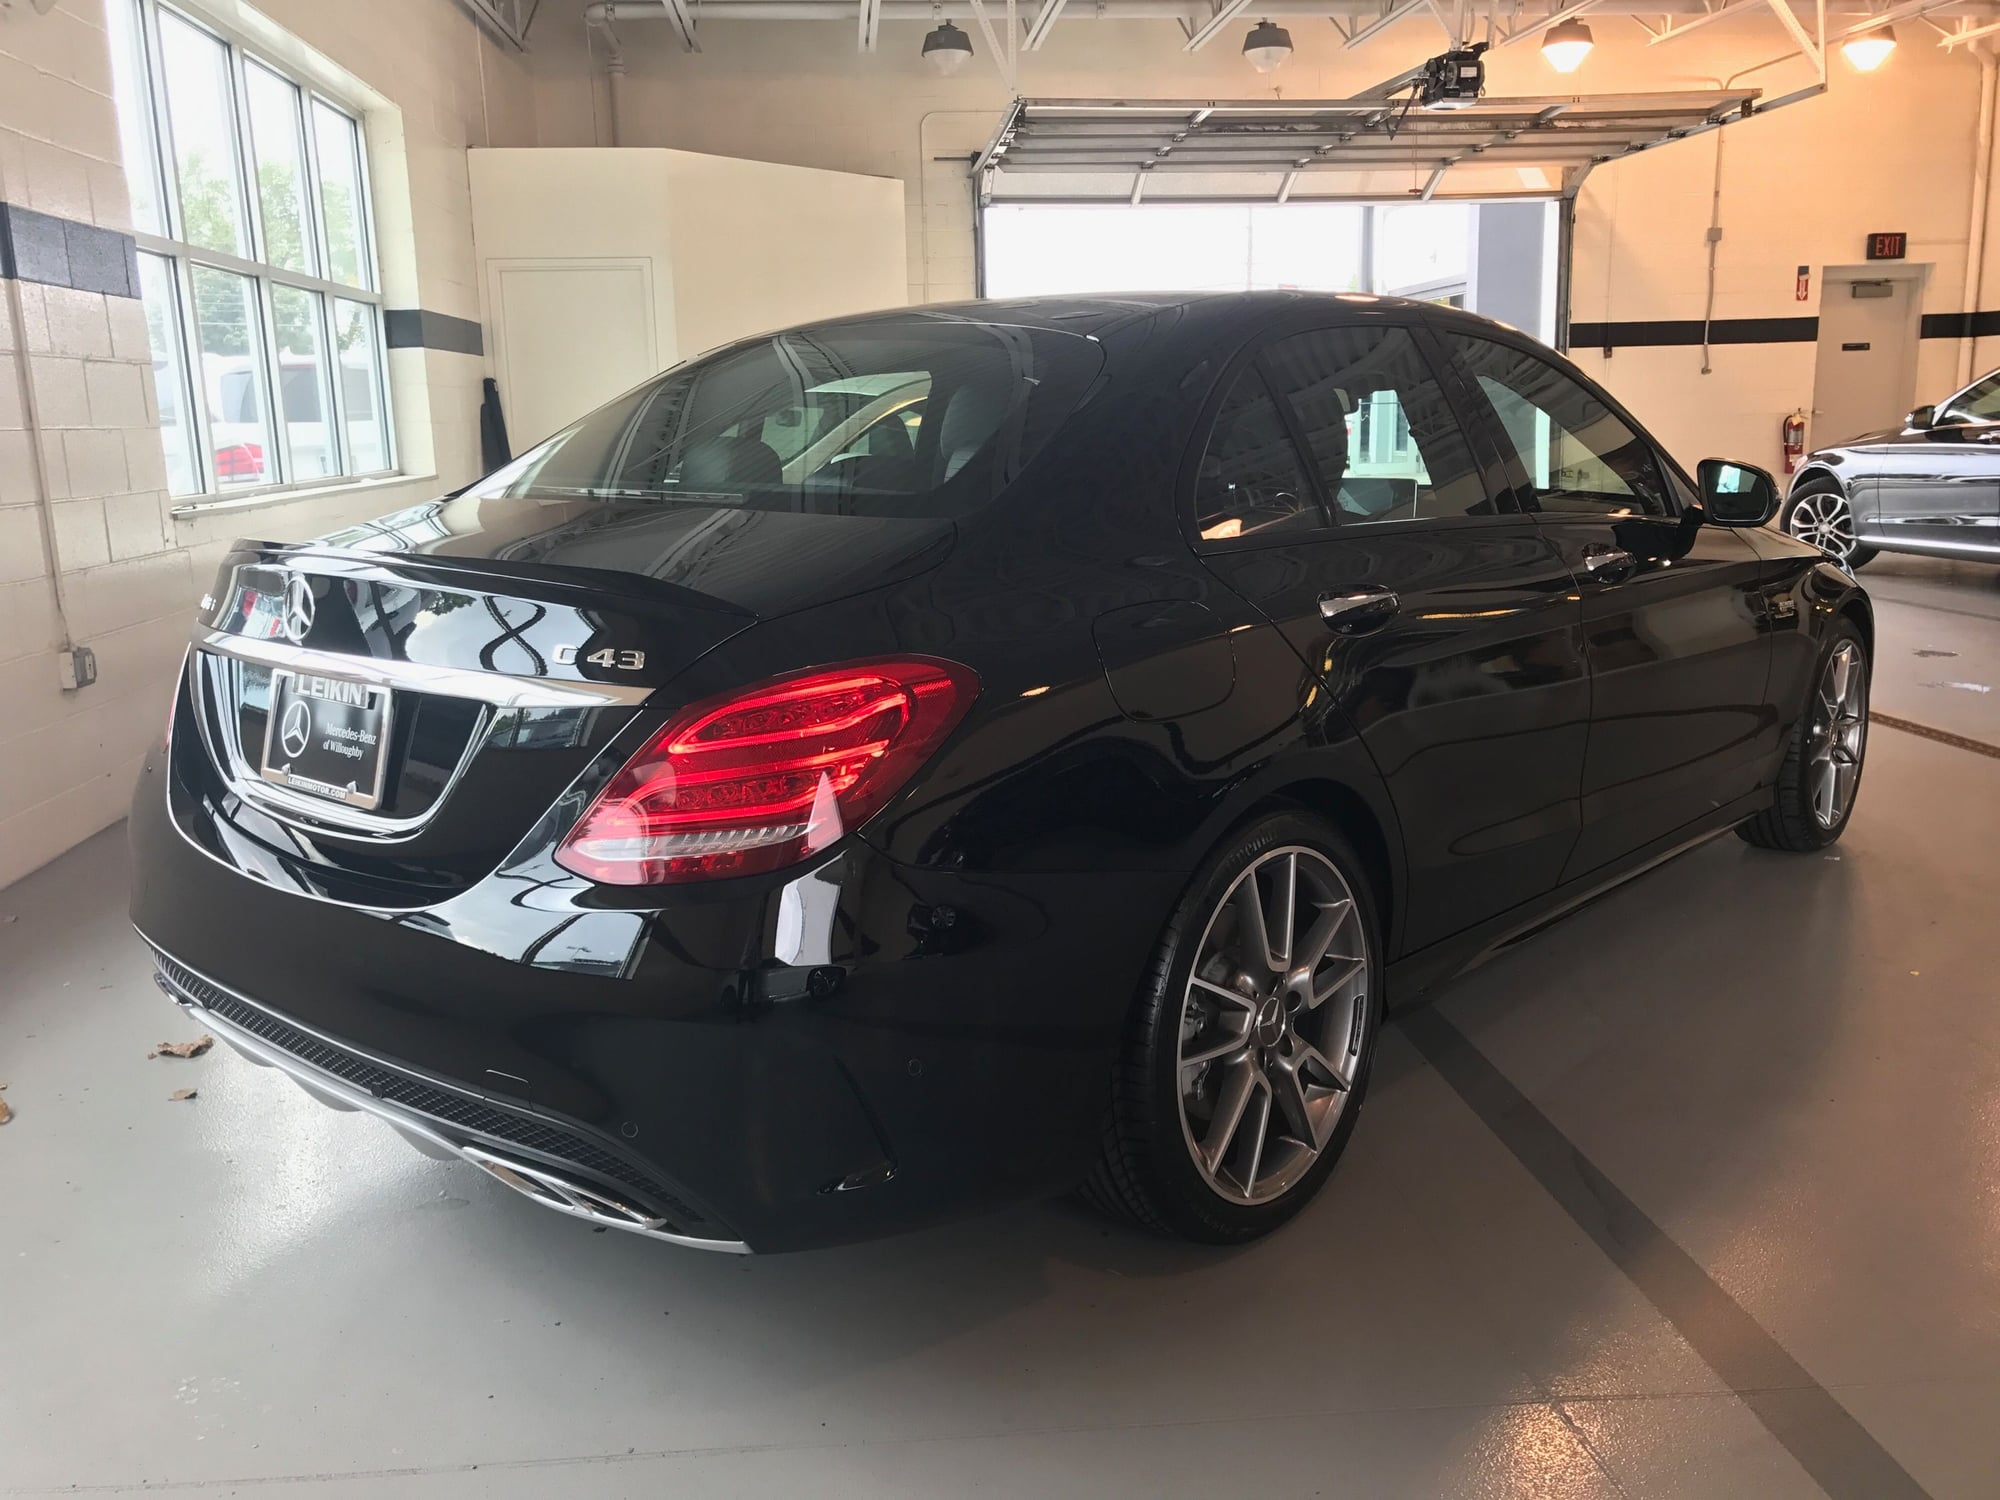 2017 Mercedes-Benz C43 AMG - 2017 AMG C43 Sedan Lease Takeover - Low Payment, Maintenance Included,Fully Optioned! - Used - VIN 55SWF6EB4HU215530 - 8,200 Miles - 6 cyl - AWD - Automatic - Sedan - Black - Cleveland, OH 44039, United States